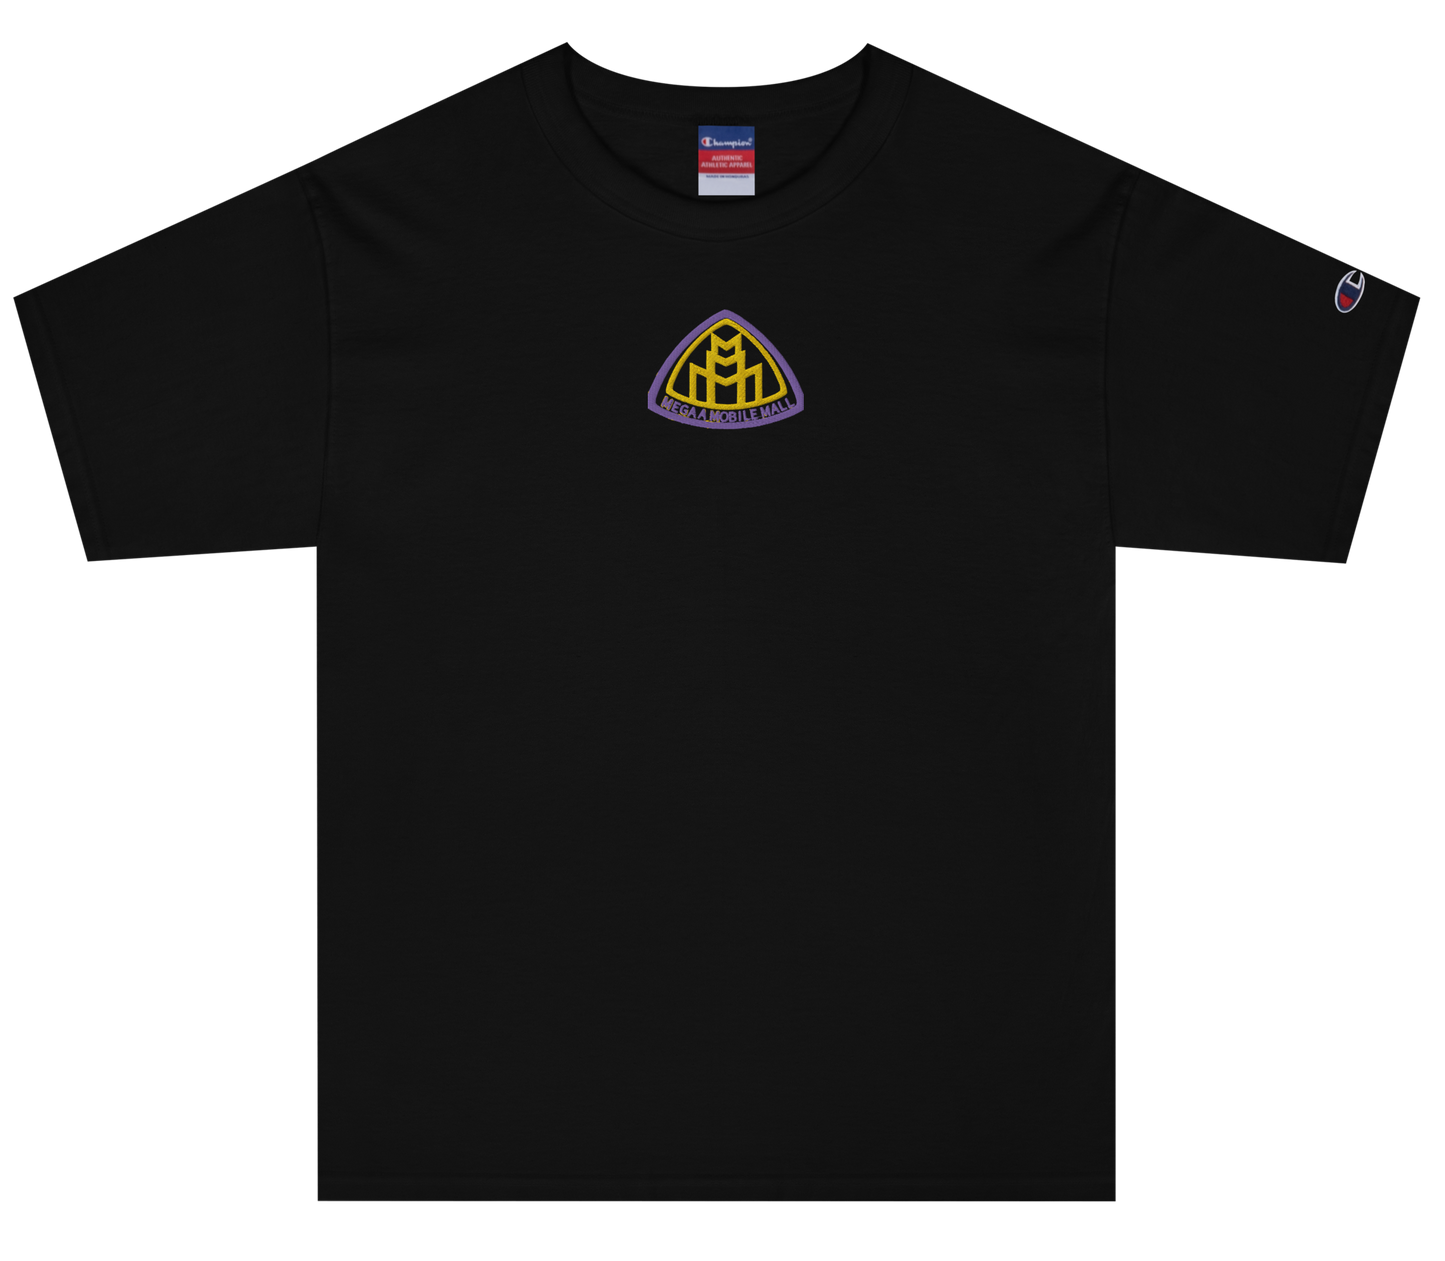 megaamobilemall logo embroidery in black on black shirt. yellow & gold stitching champion brand shirt